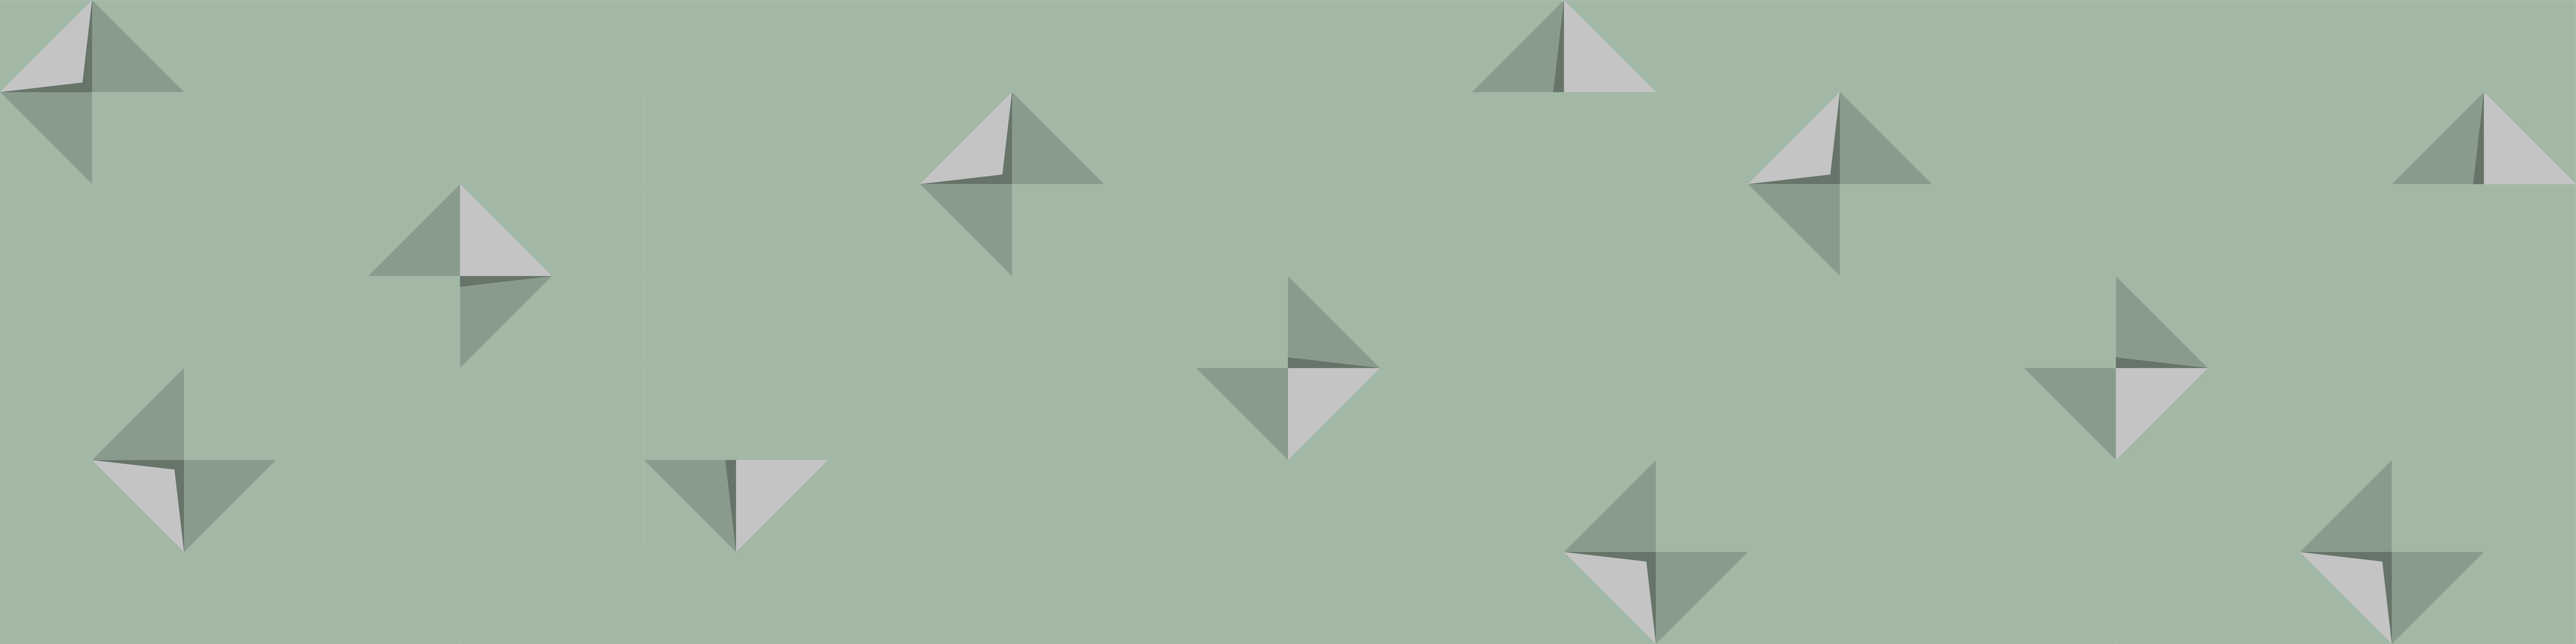 Featured Image Origami Grey Little